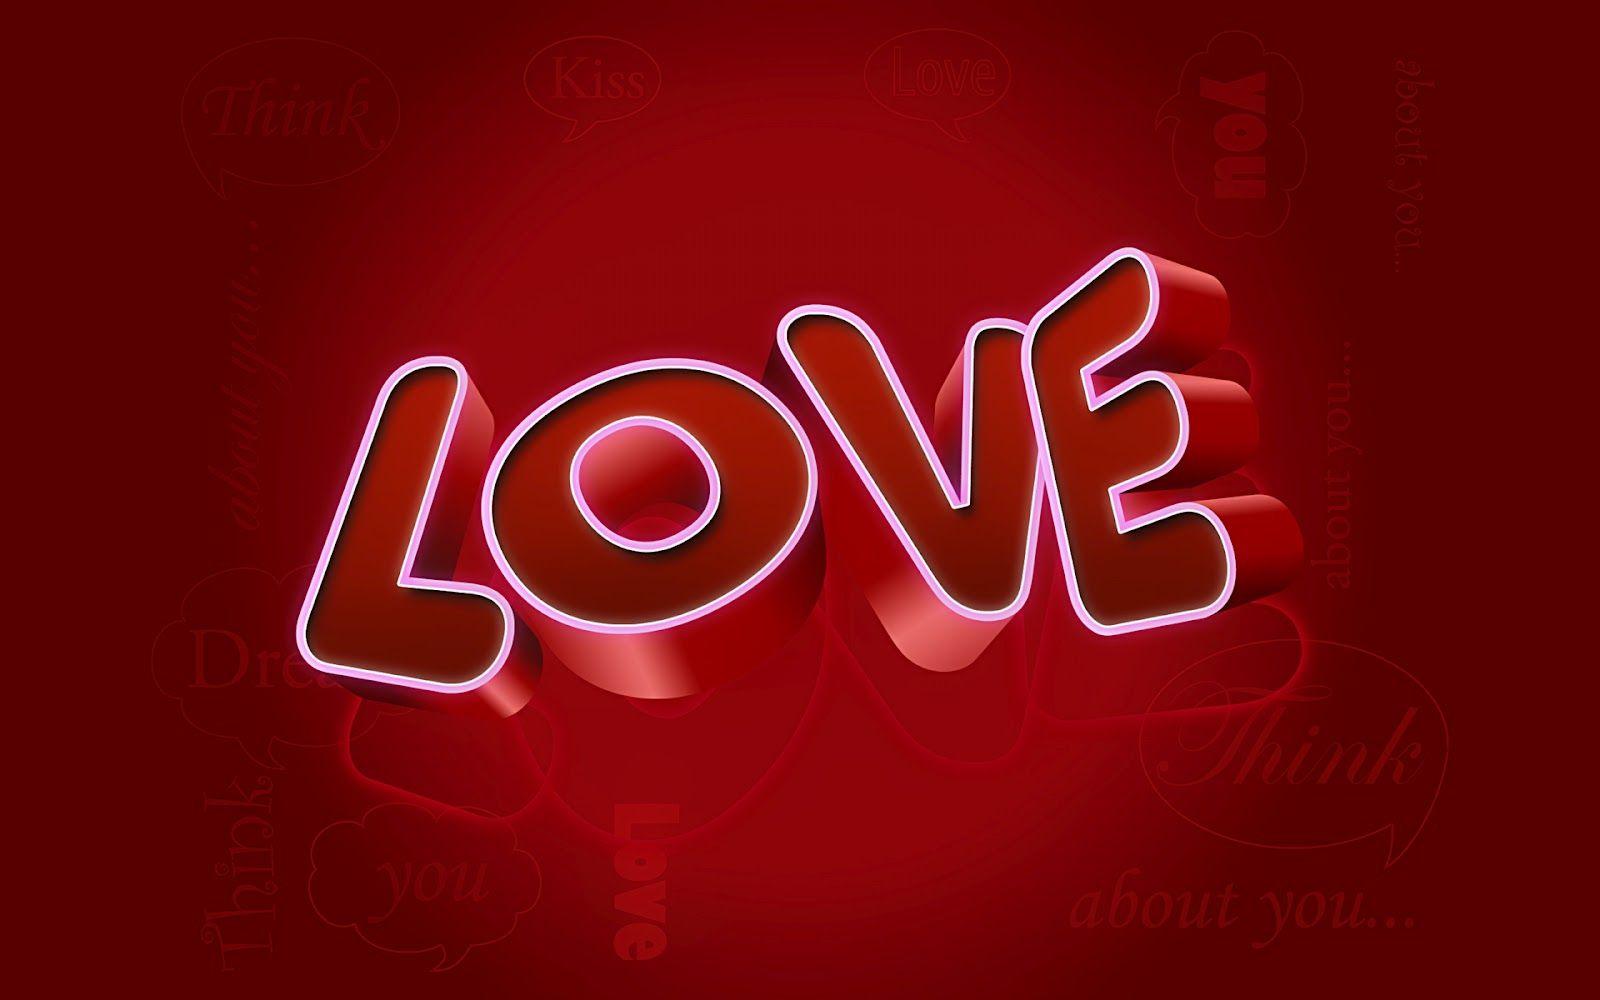 I Love You Wallpaper 15462 1600x1000 px